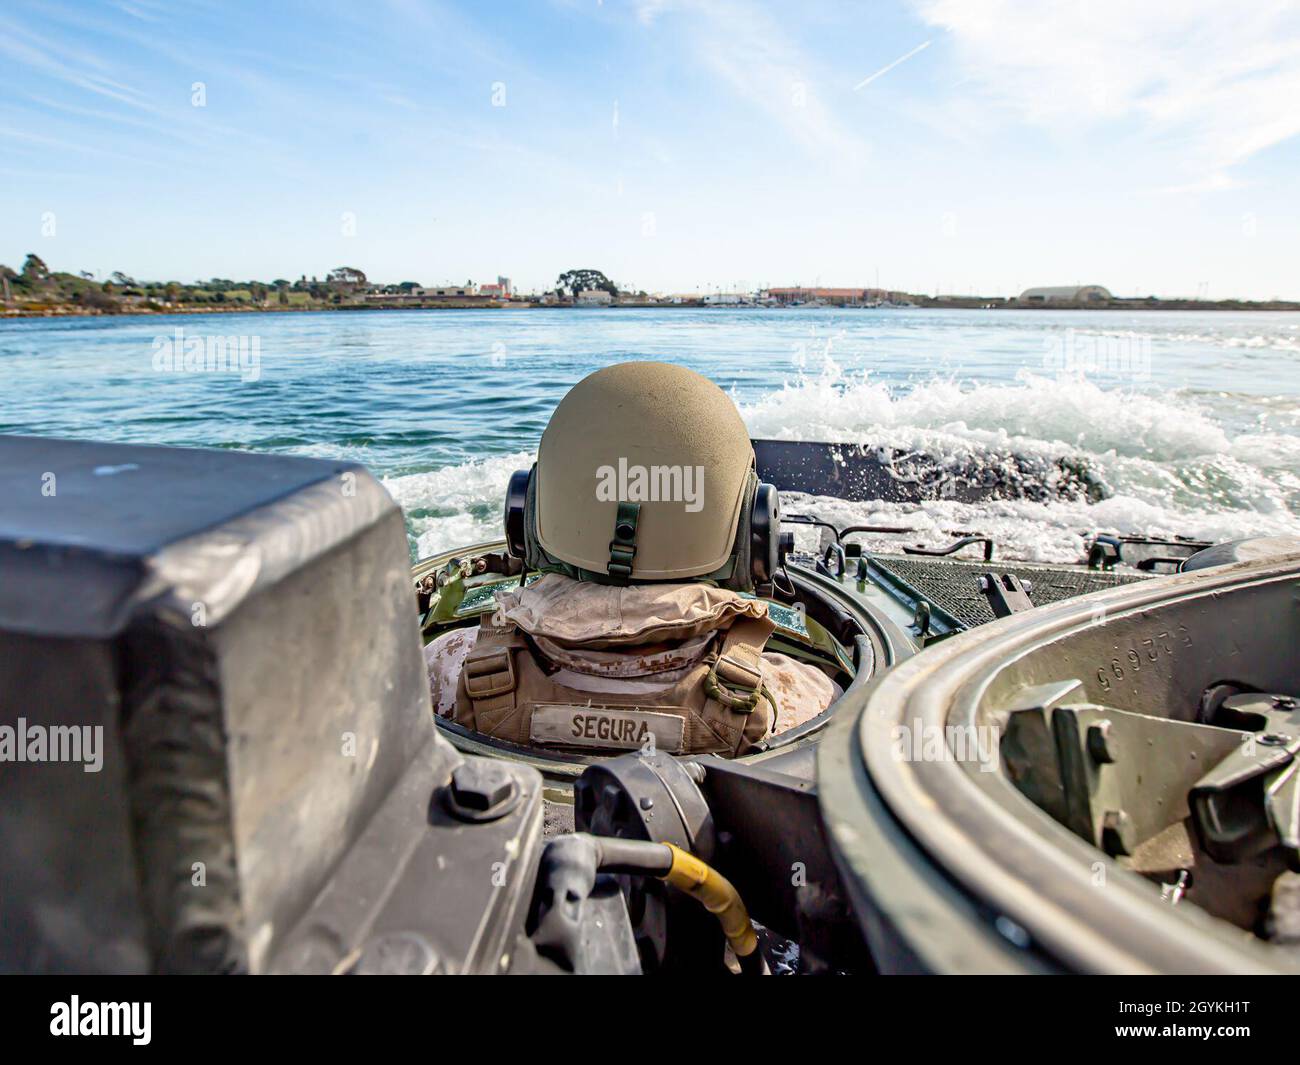 U.S. Marine Corps Sgt. Salomon Segura, an assault amphibious vehicle section leader with 3rd Assault Amphibian Battalion, drives an AAV-P7/A1 assault amphibious vehicle into the water during Exercise Iron Fist 2020 on Marine Corps Base Camp Pendleton, California, Jan. 19. Exercise Iron Fist provides realistic, relevant training necessary for effective combined military operations. (U.S. Marine Corps photo by Lance Cpl. Britany Rowlett) Stock Photo